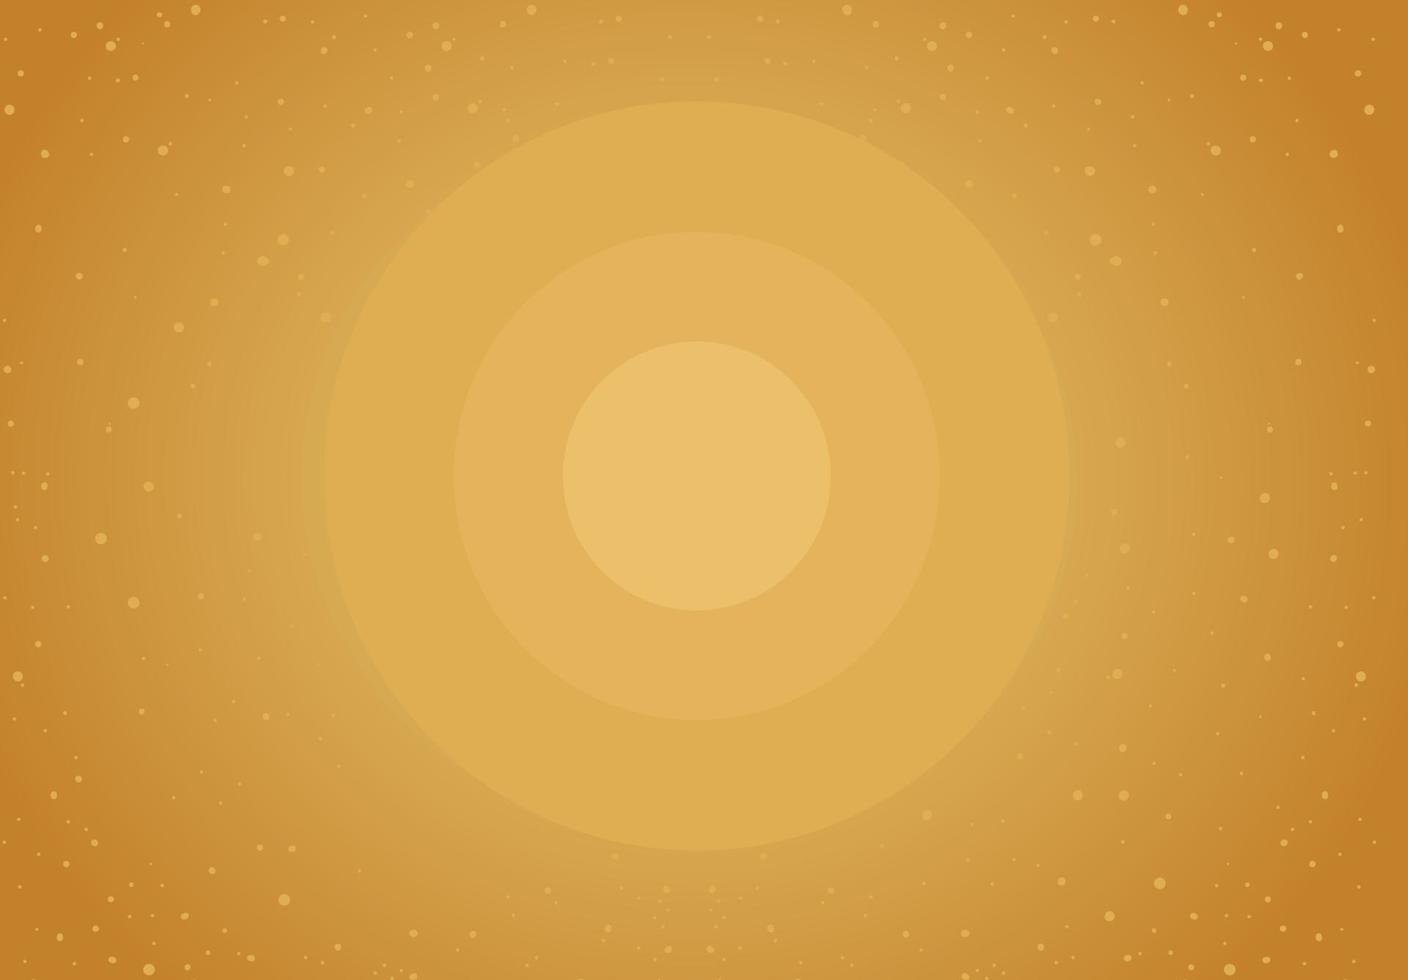 Abstract brown or yellow background with glowing circle in the middle vector